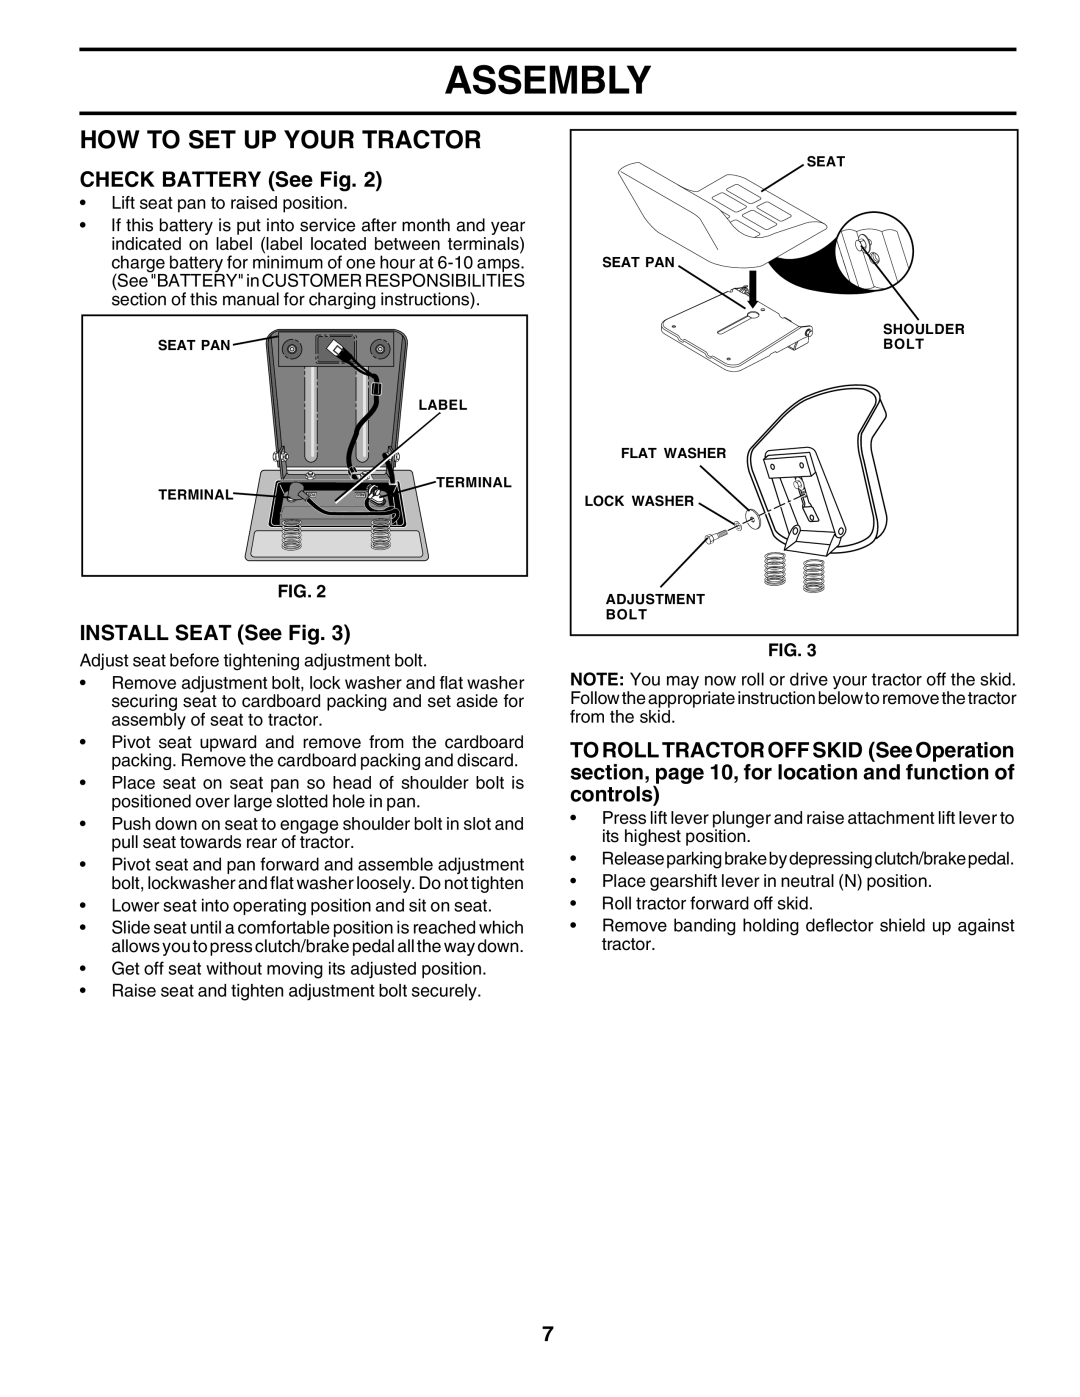 Poulan 182080 manual How To Set Up Your Tractor, CHECK BATTERY See Fig, INSTALL SEAT See Fig, Assembly 